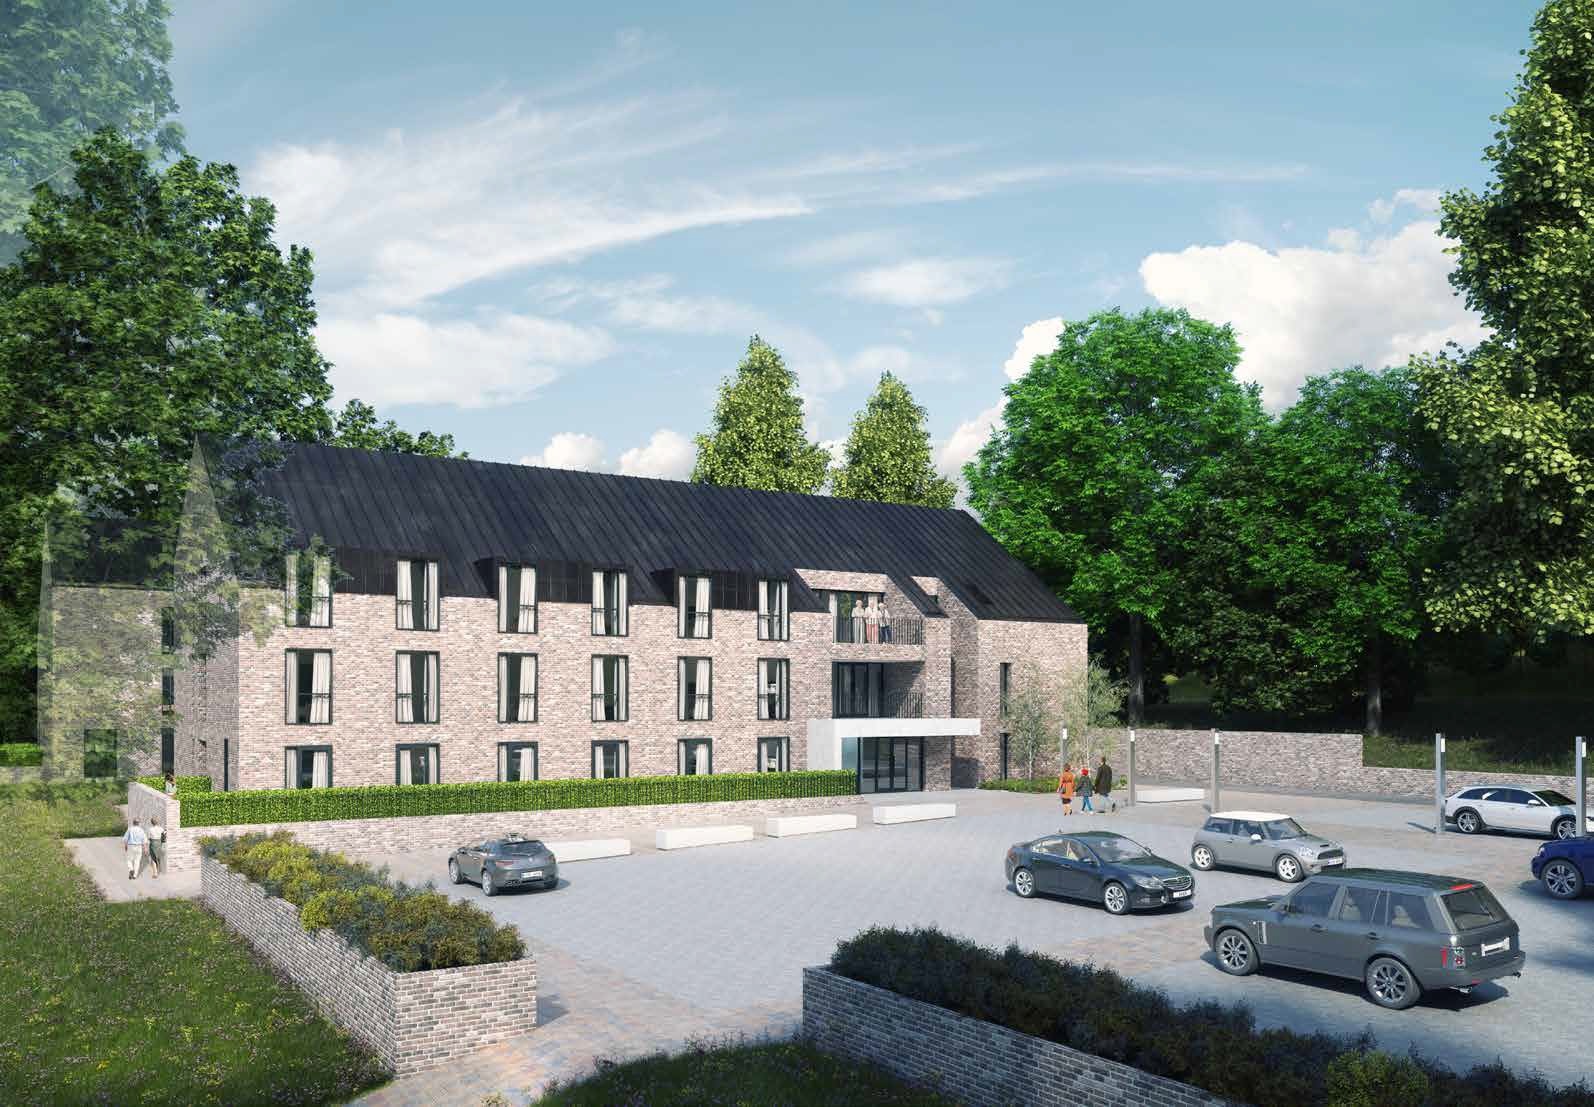 Care home planned on disused Dundee hospital site